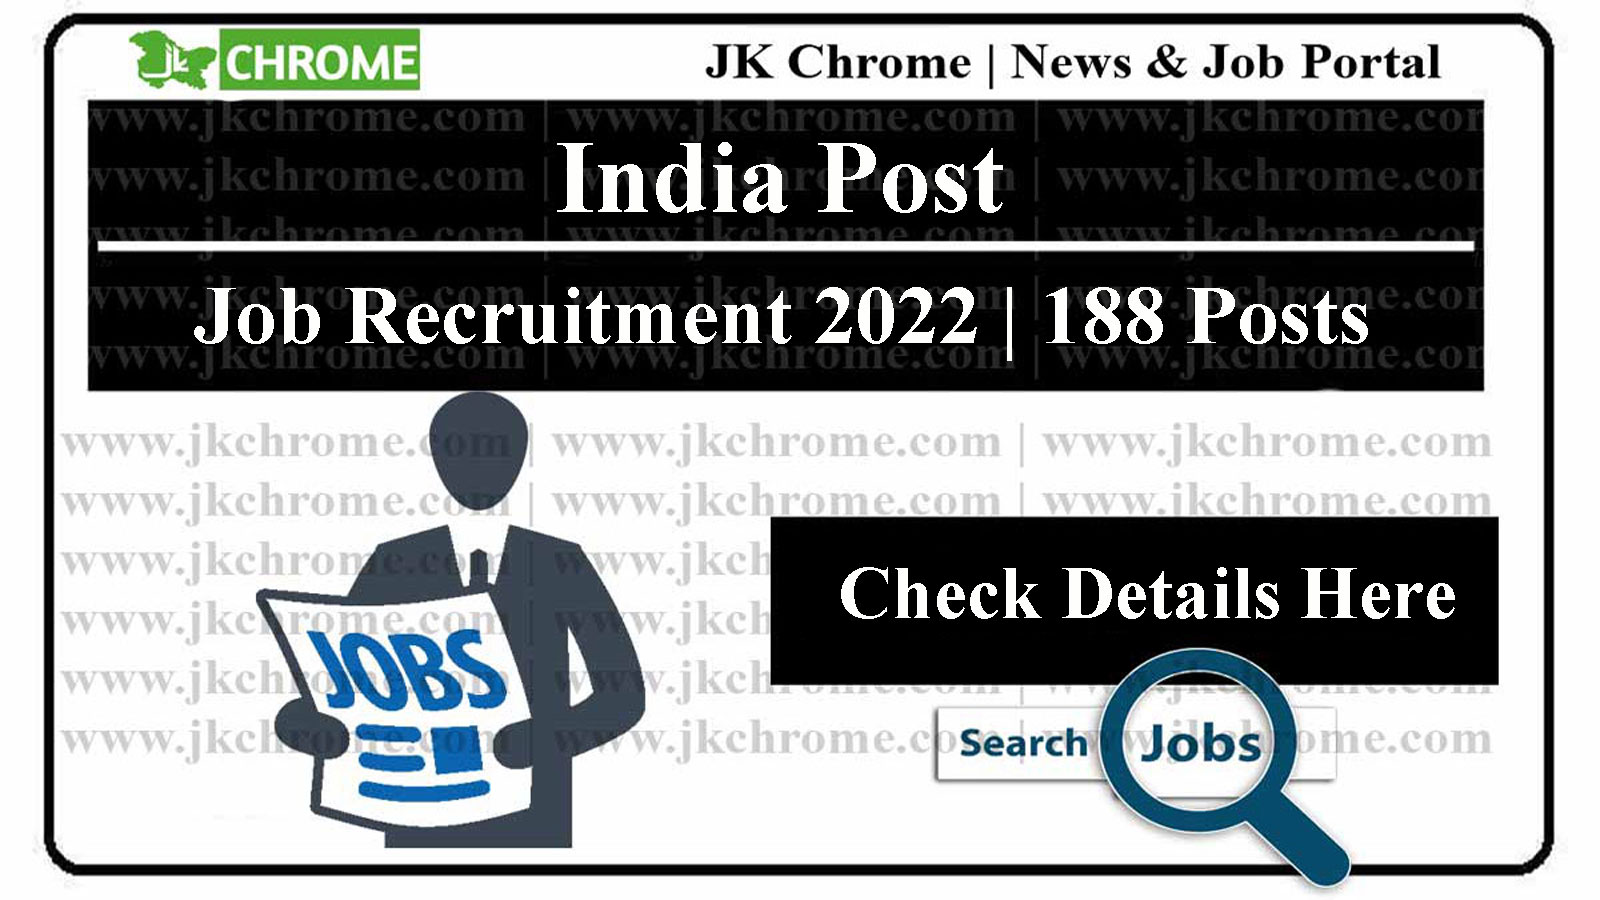 India Post Recruitment 2022: Apply online for 188 vacancies